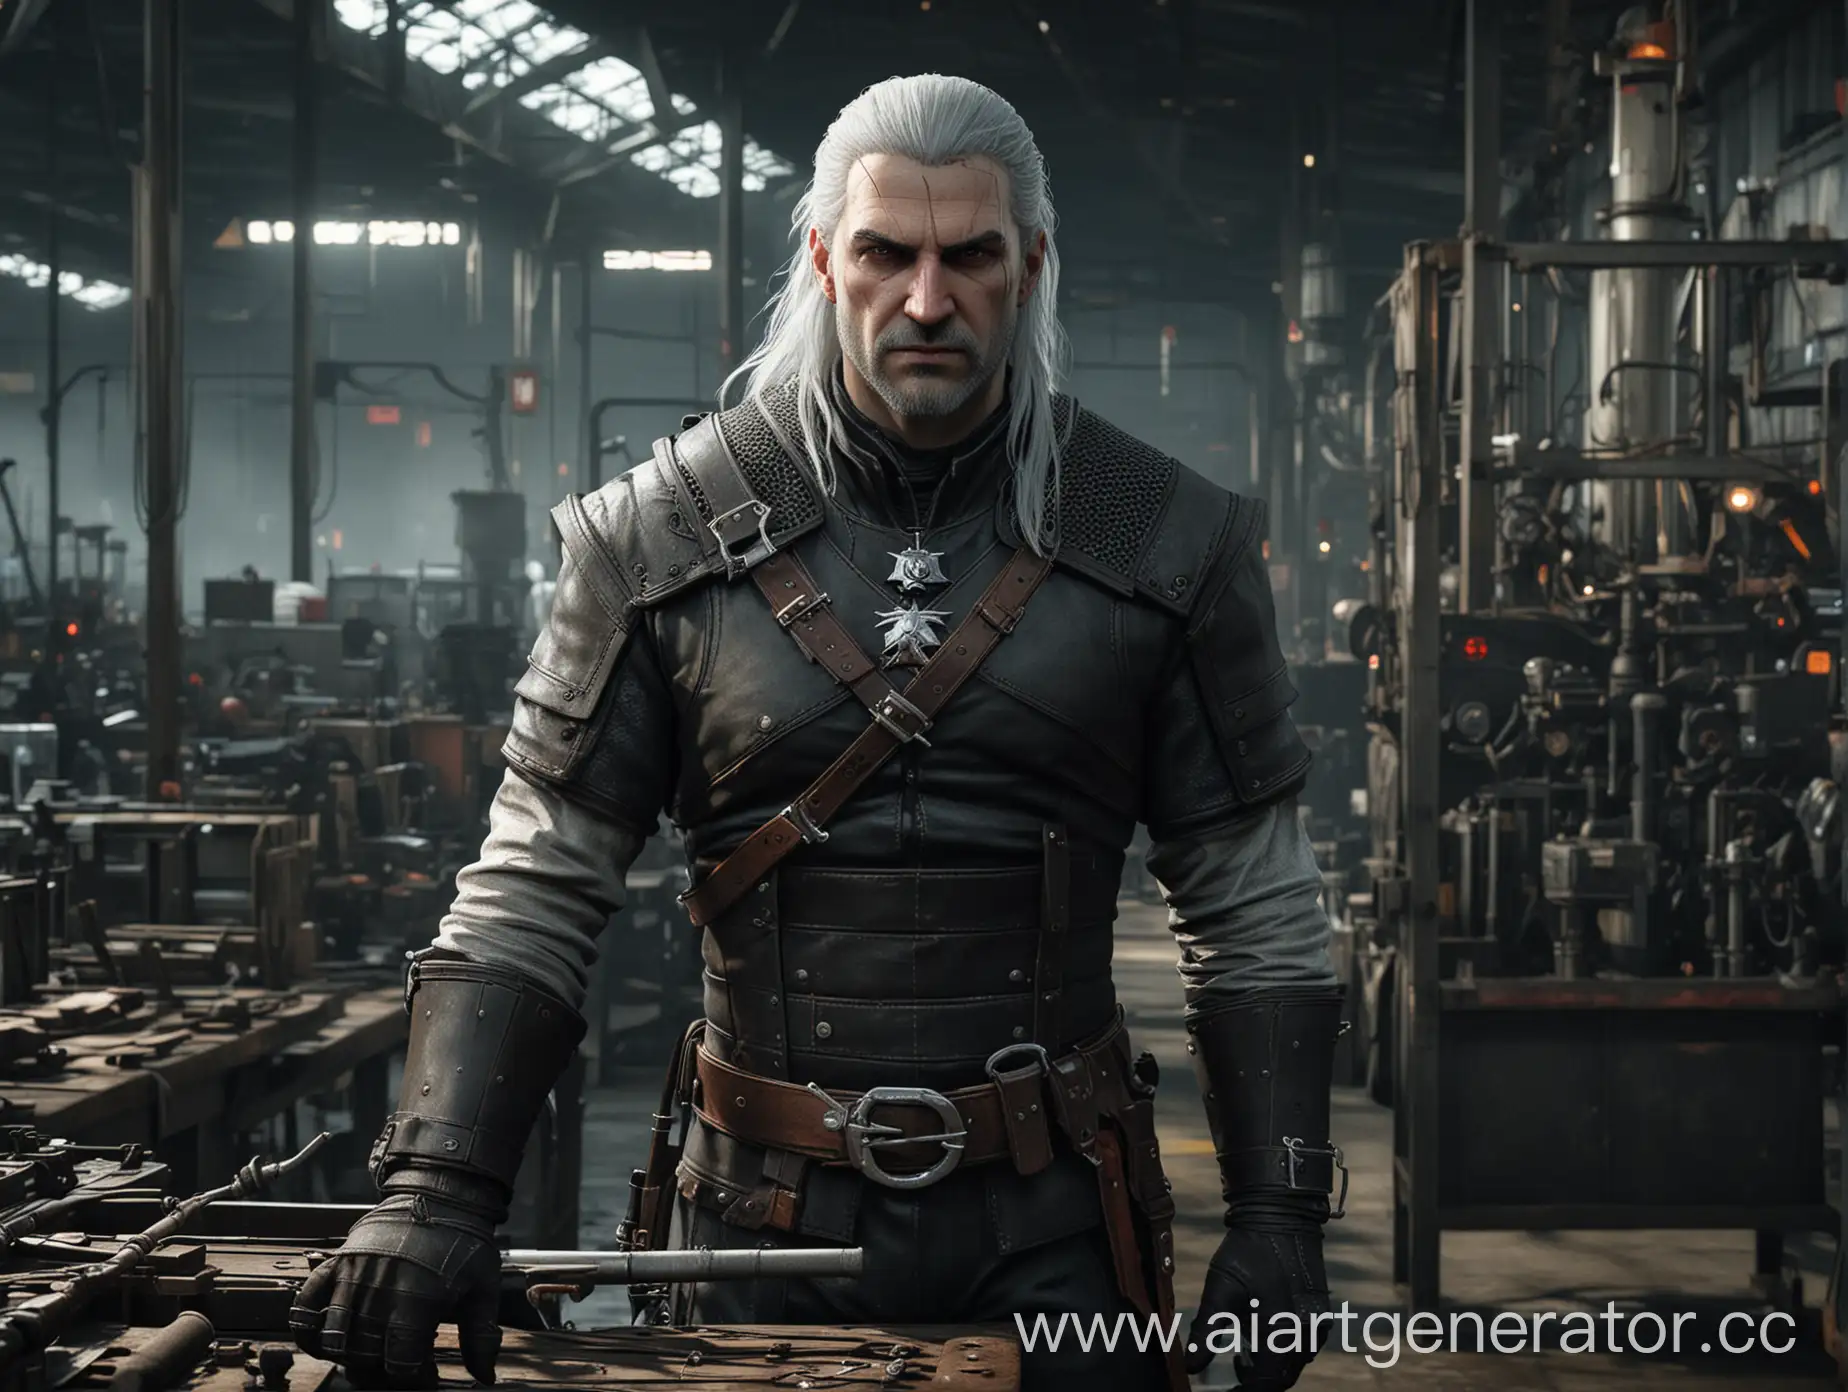 Witcher-Character-Operating-Machinery-in-the-Factory